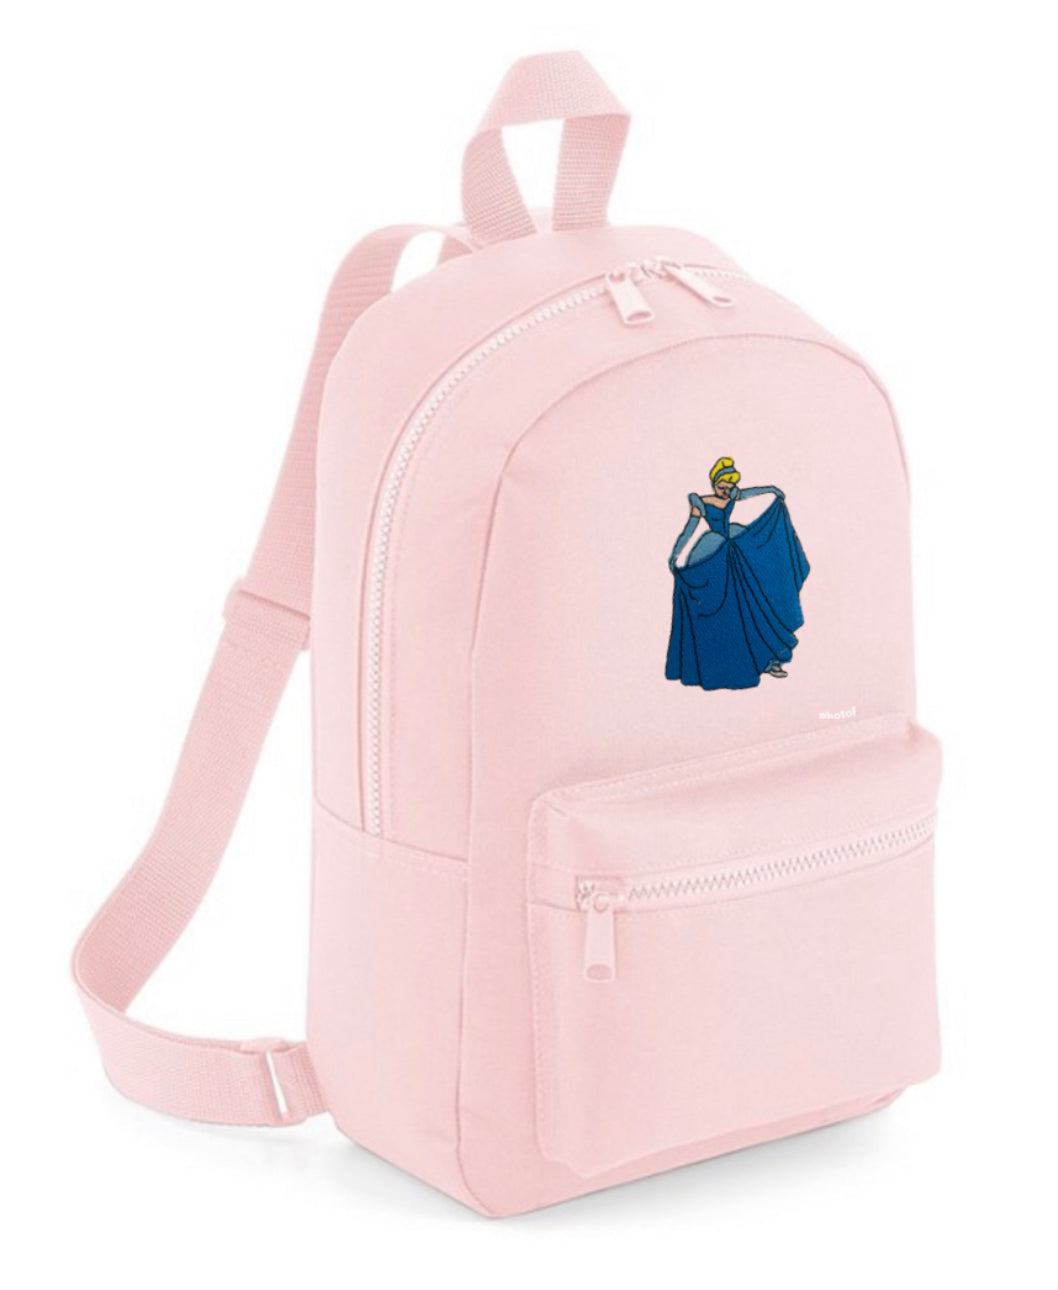 Cinderella Backpack available in Pink or Grey